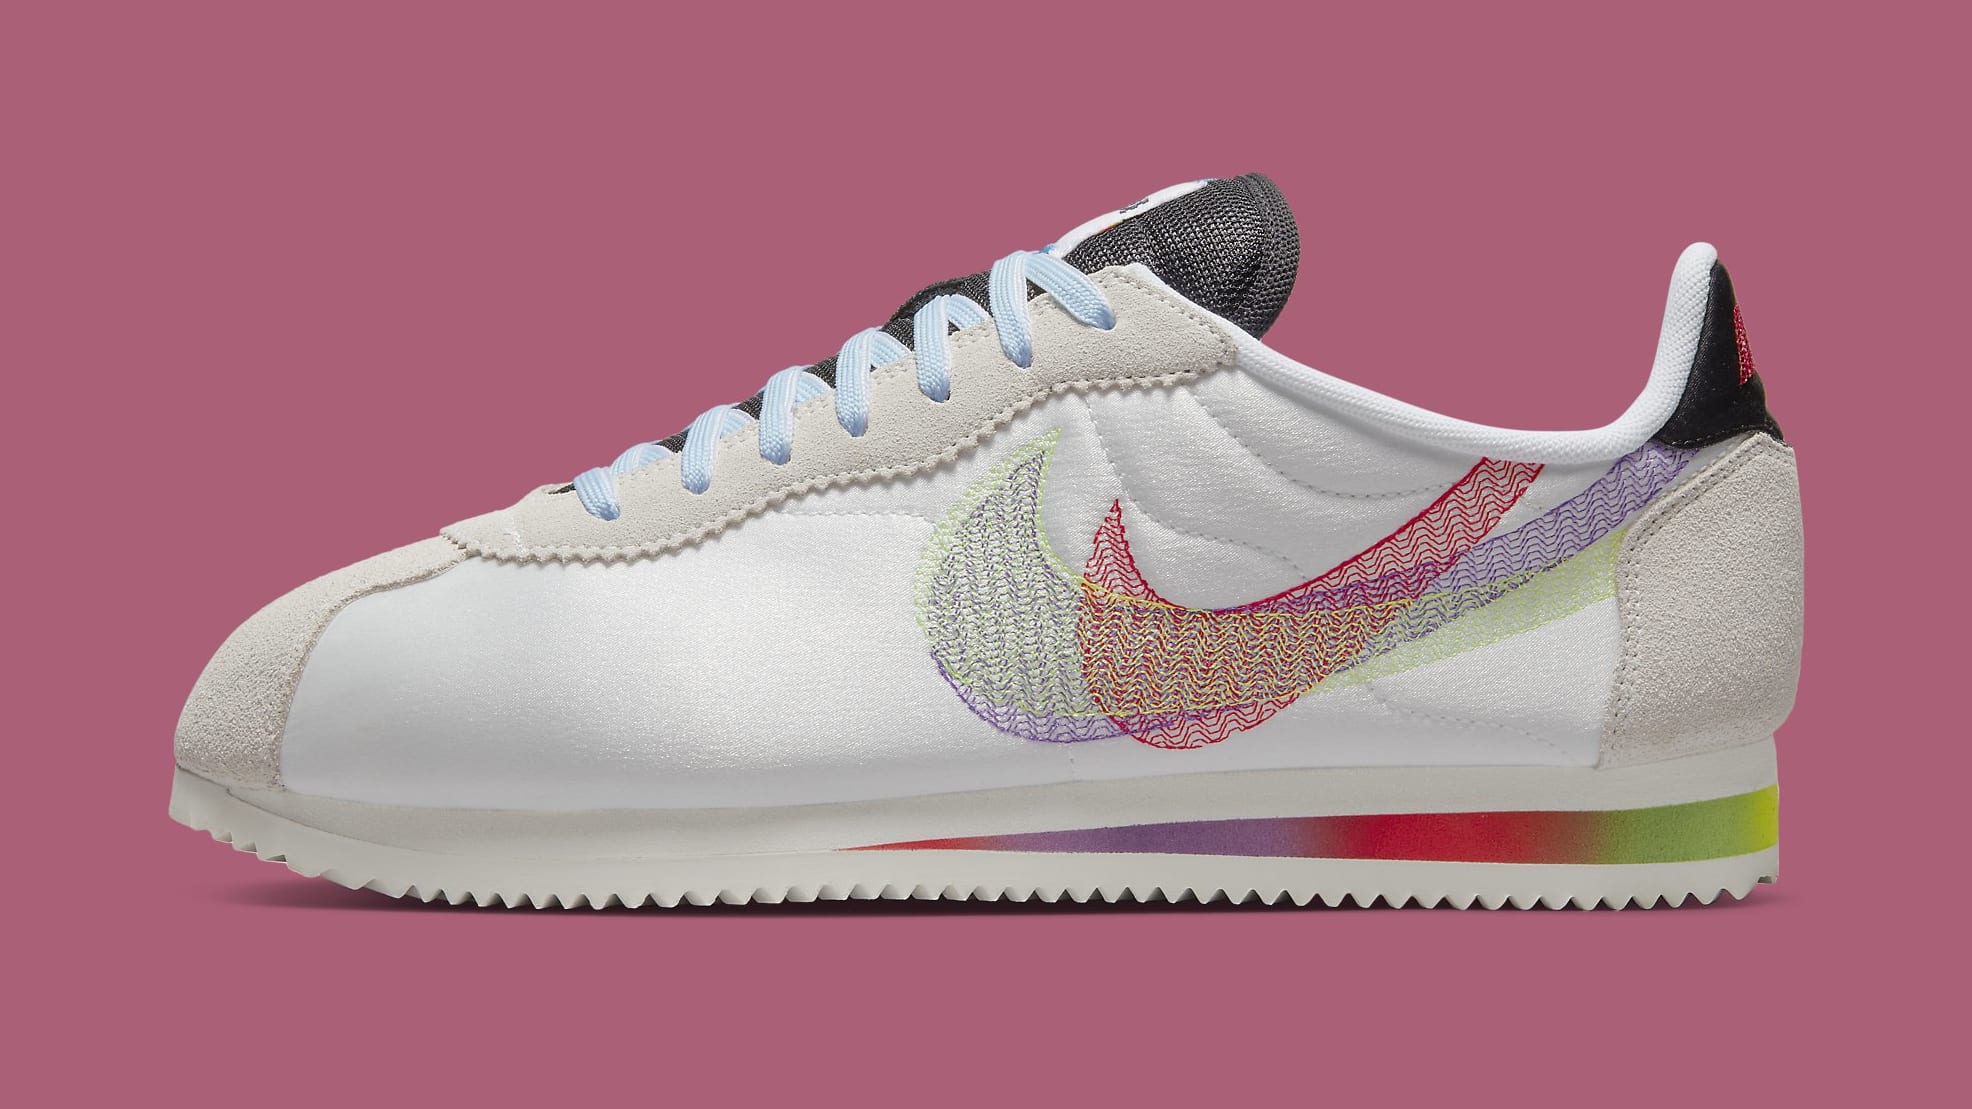 Nike Cortez 'Be True' DR5491 100 Lateral